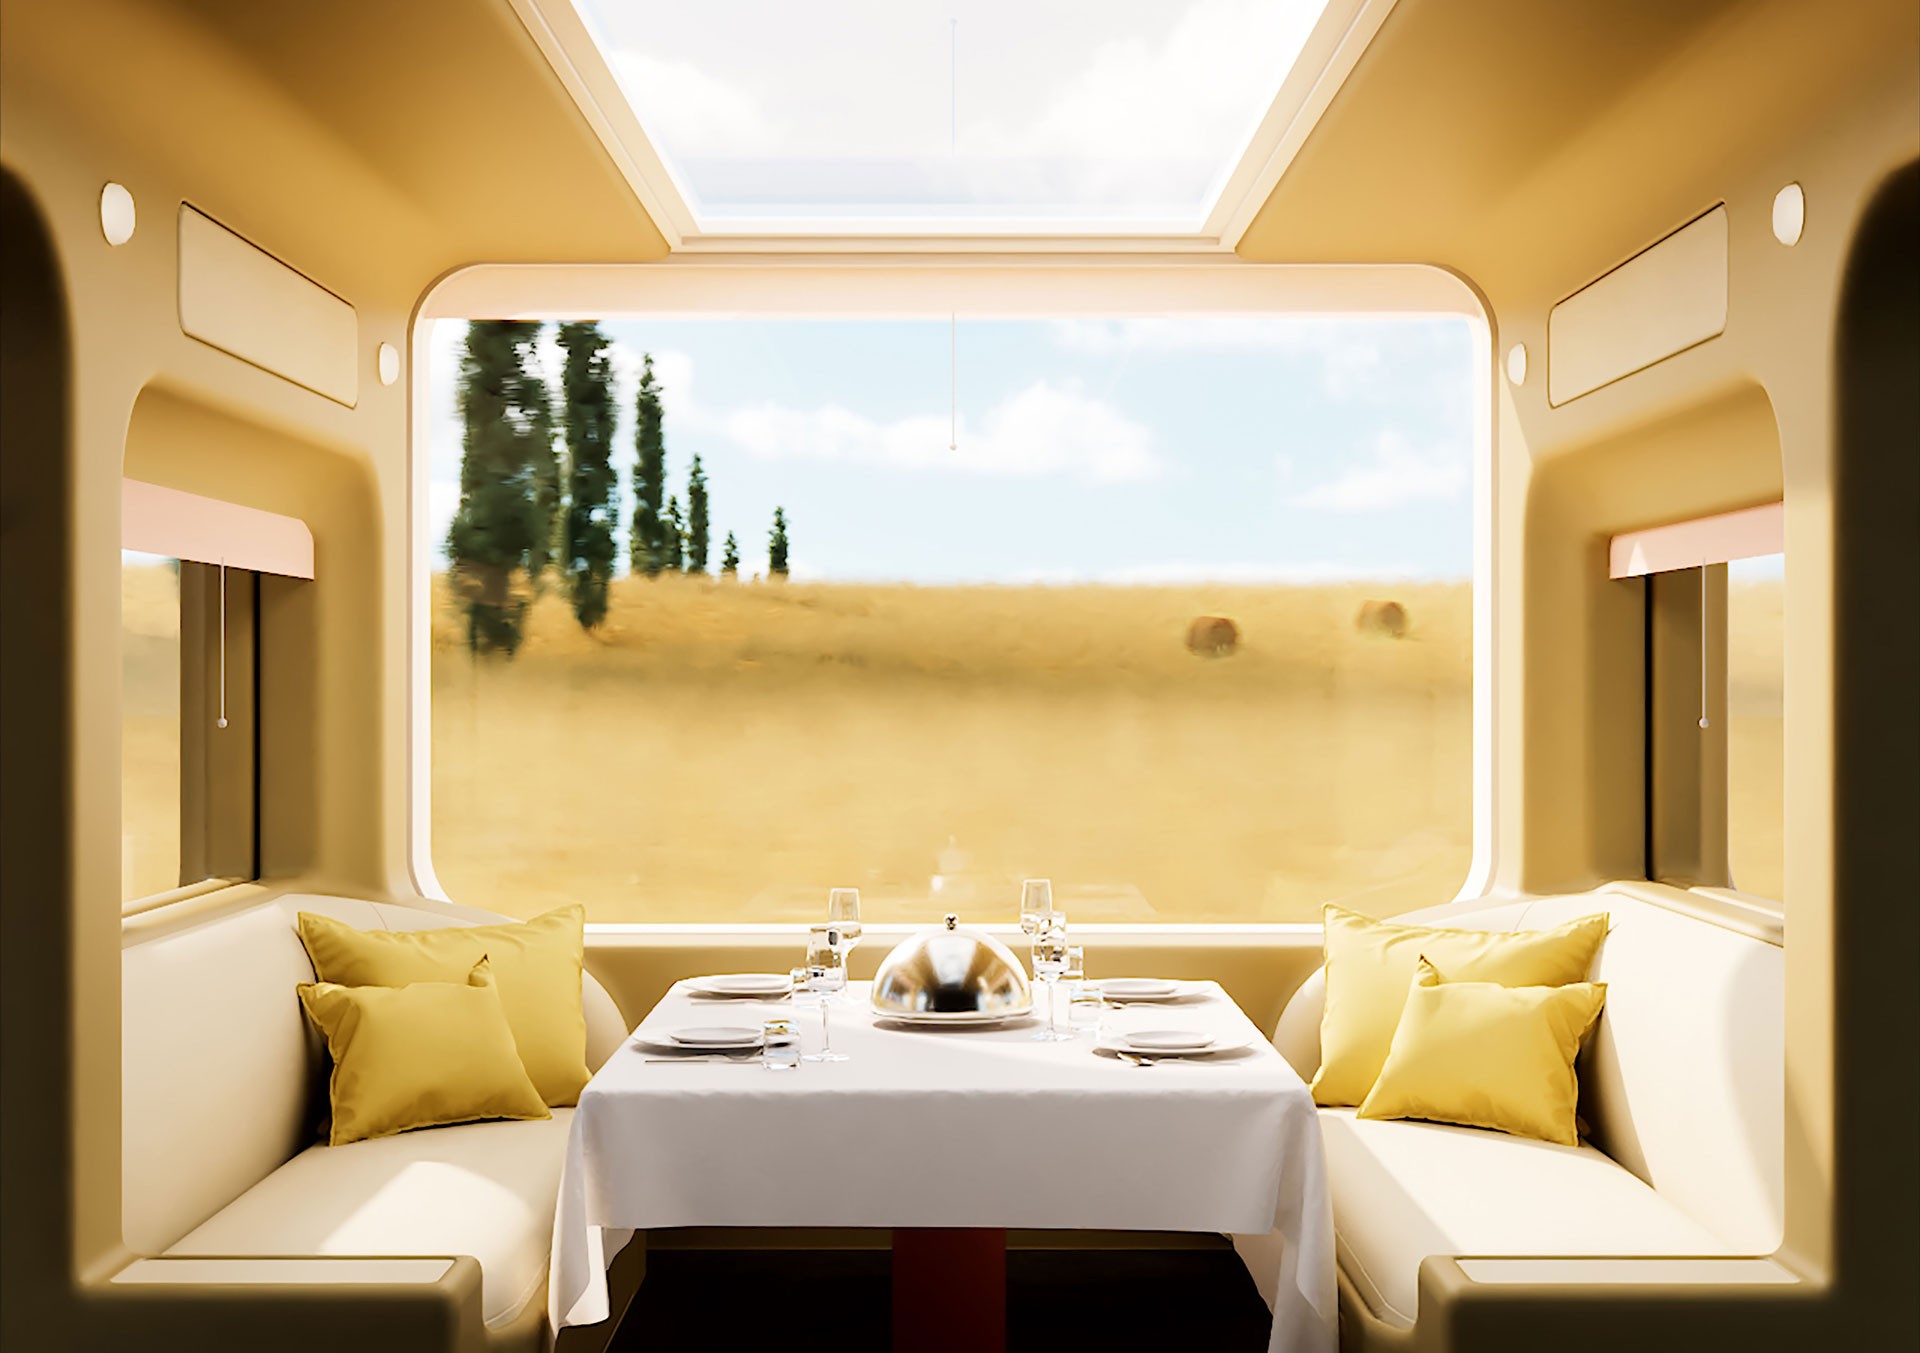 Rendering of a train compartment, a table set.